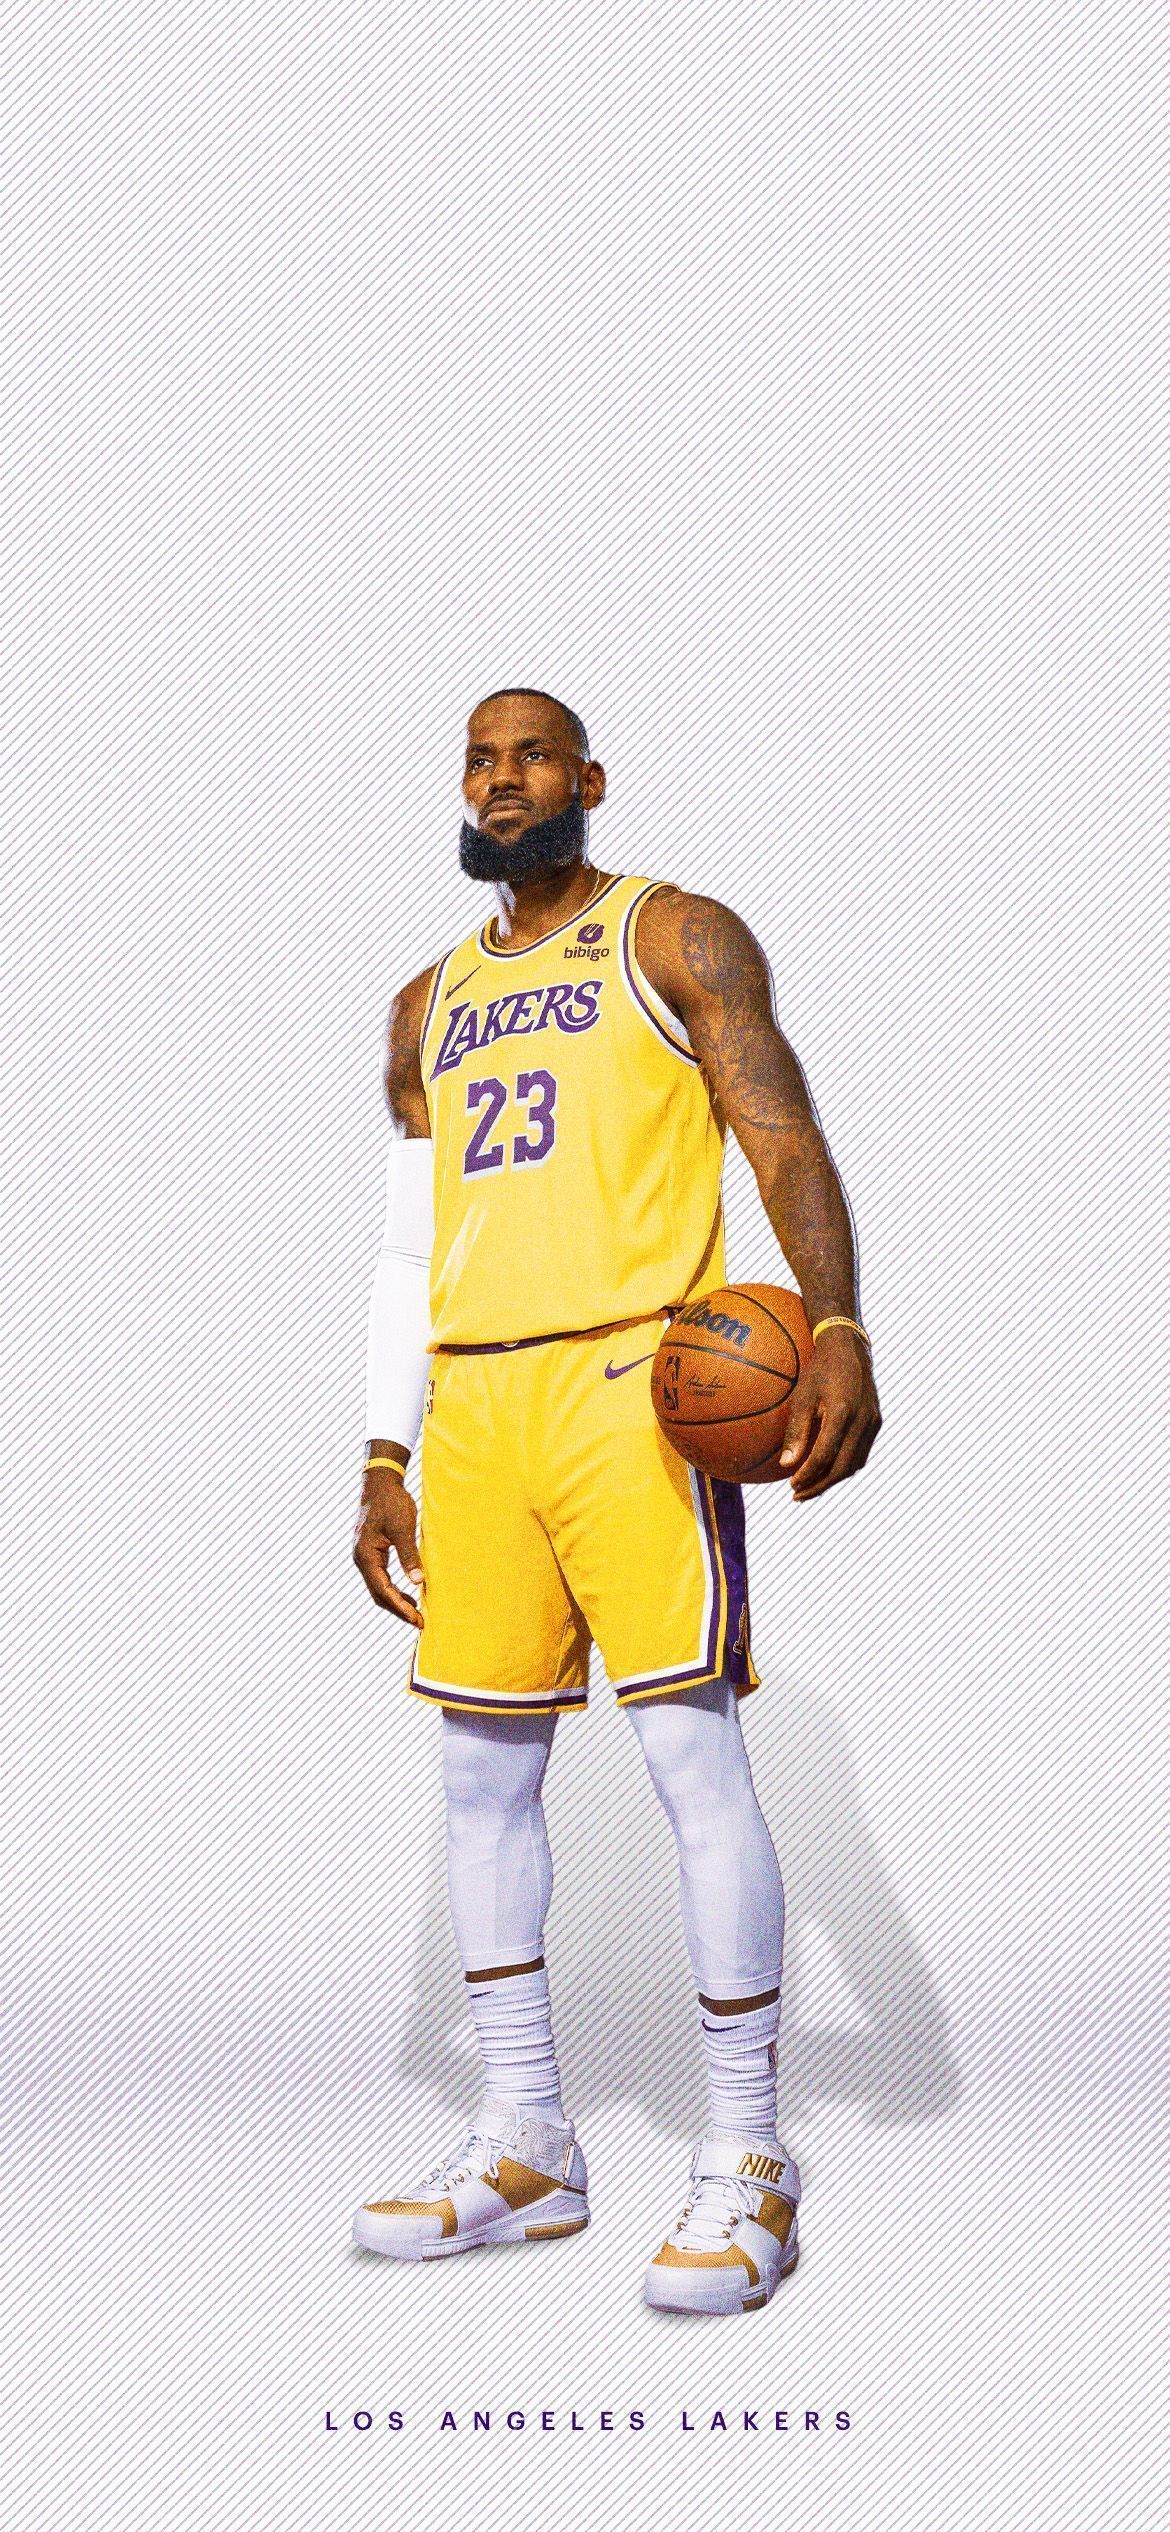 Lebron James Lakers Wallpaper iPhone with high-resolution 1080x1920 pixel. You can use this wallpaper for your iPhone 5, 6, 7, 8, X, XS, XR backgrounds, Mobile Screensaver, or iPad Lock Screen - Los Angeles Lakers, Lebron James